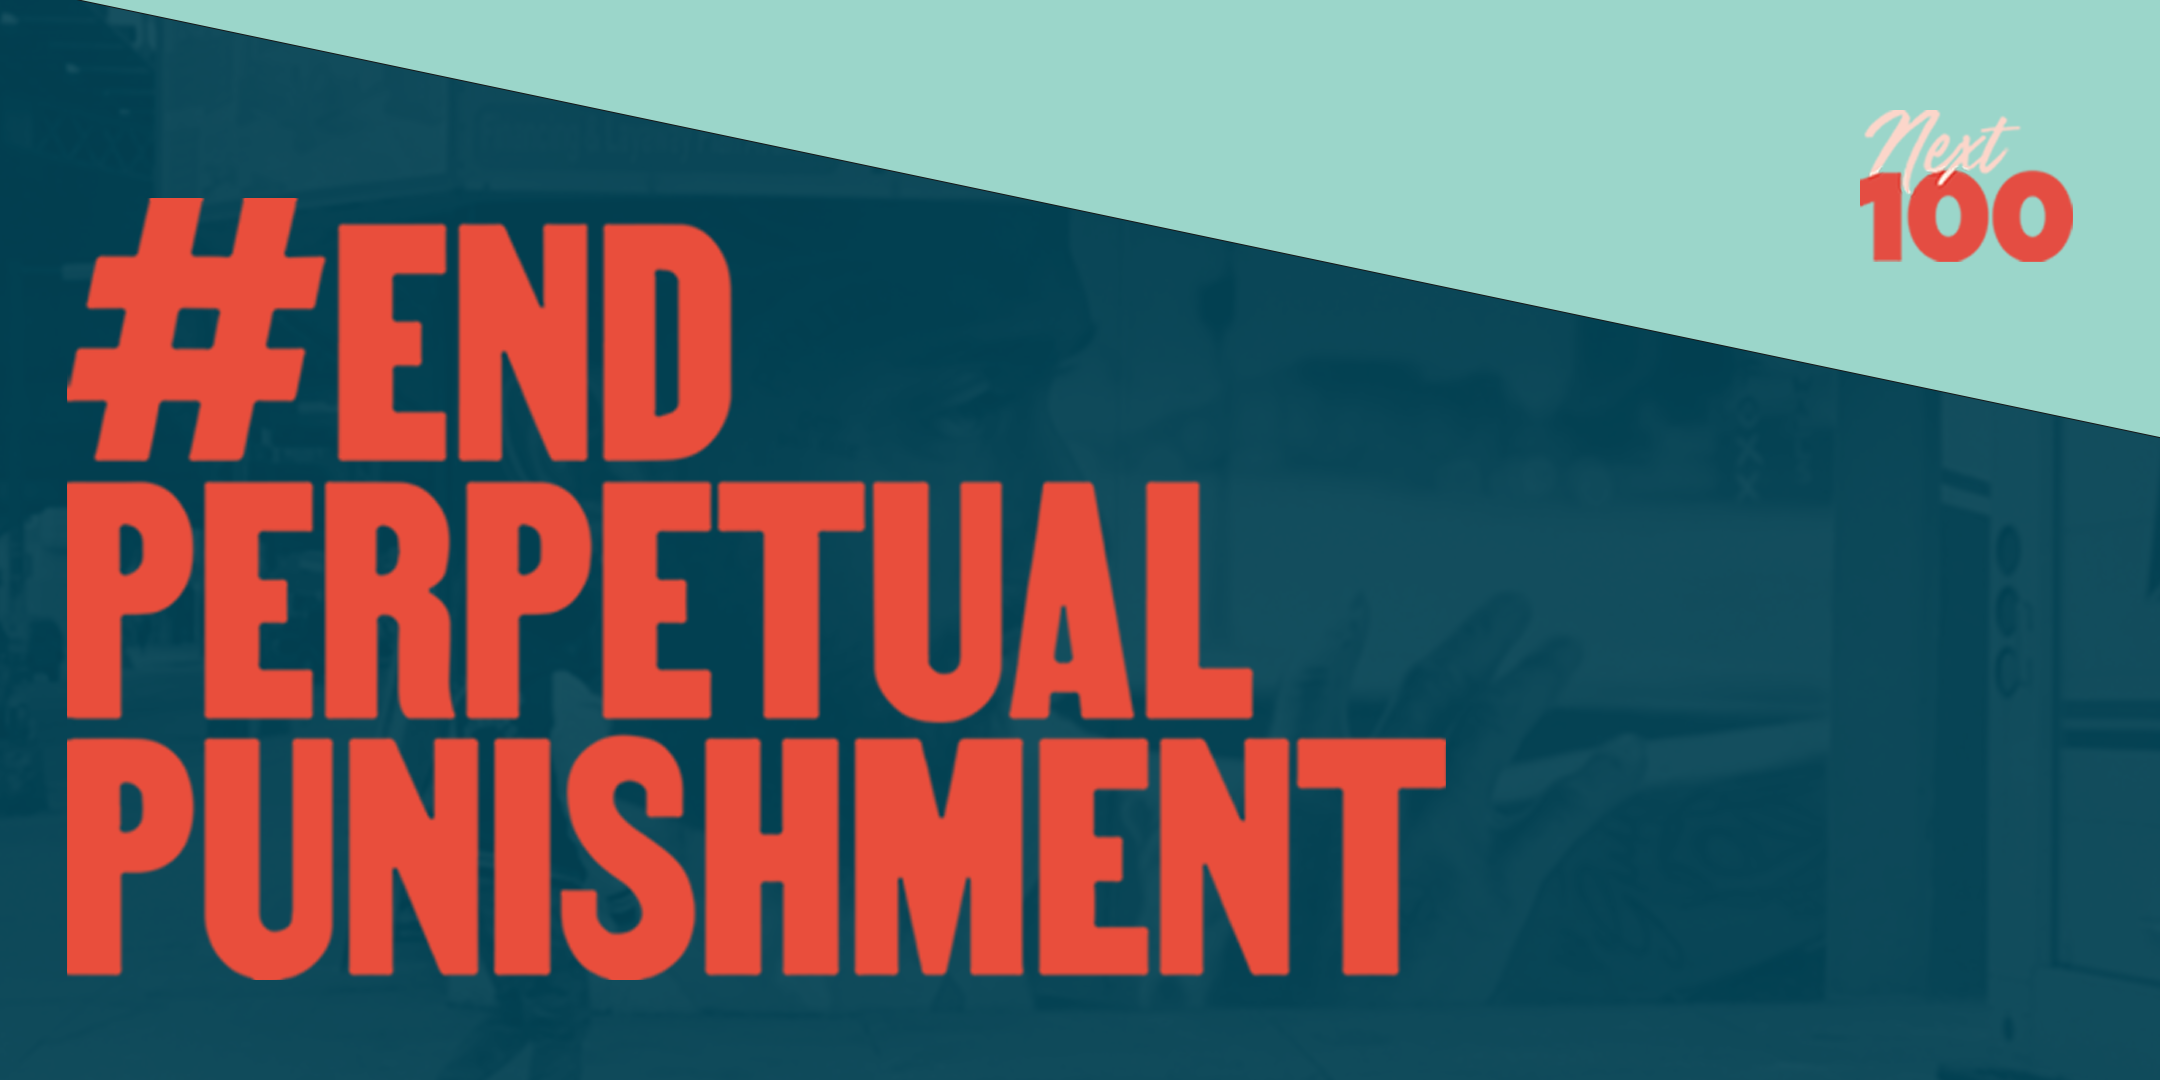 End Perpetual Punishment